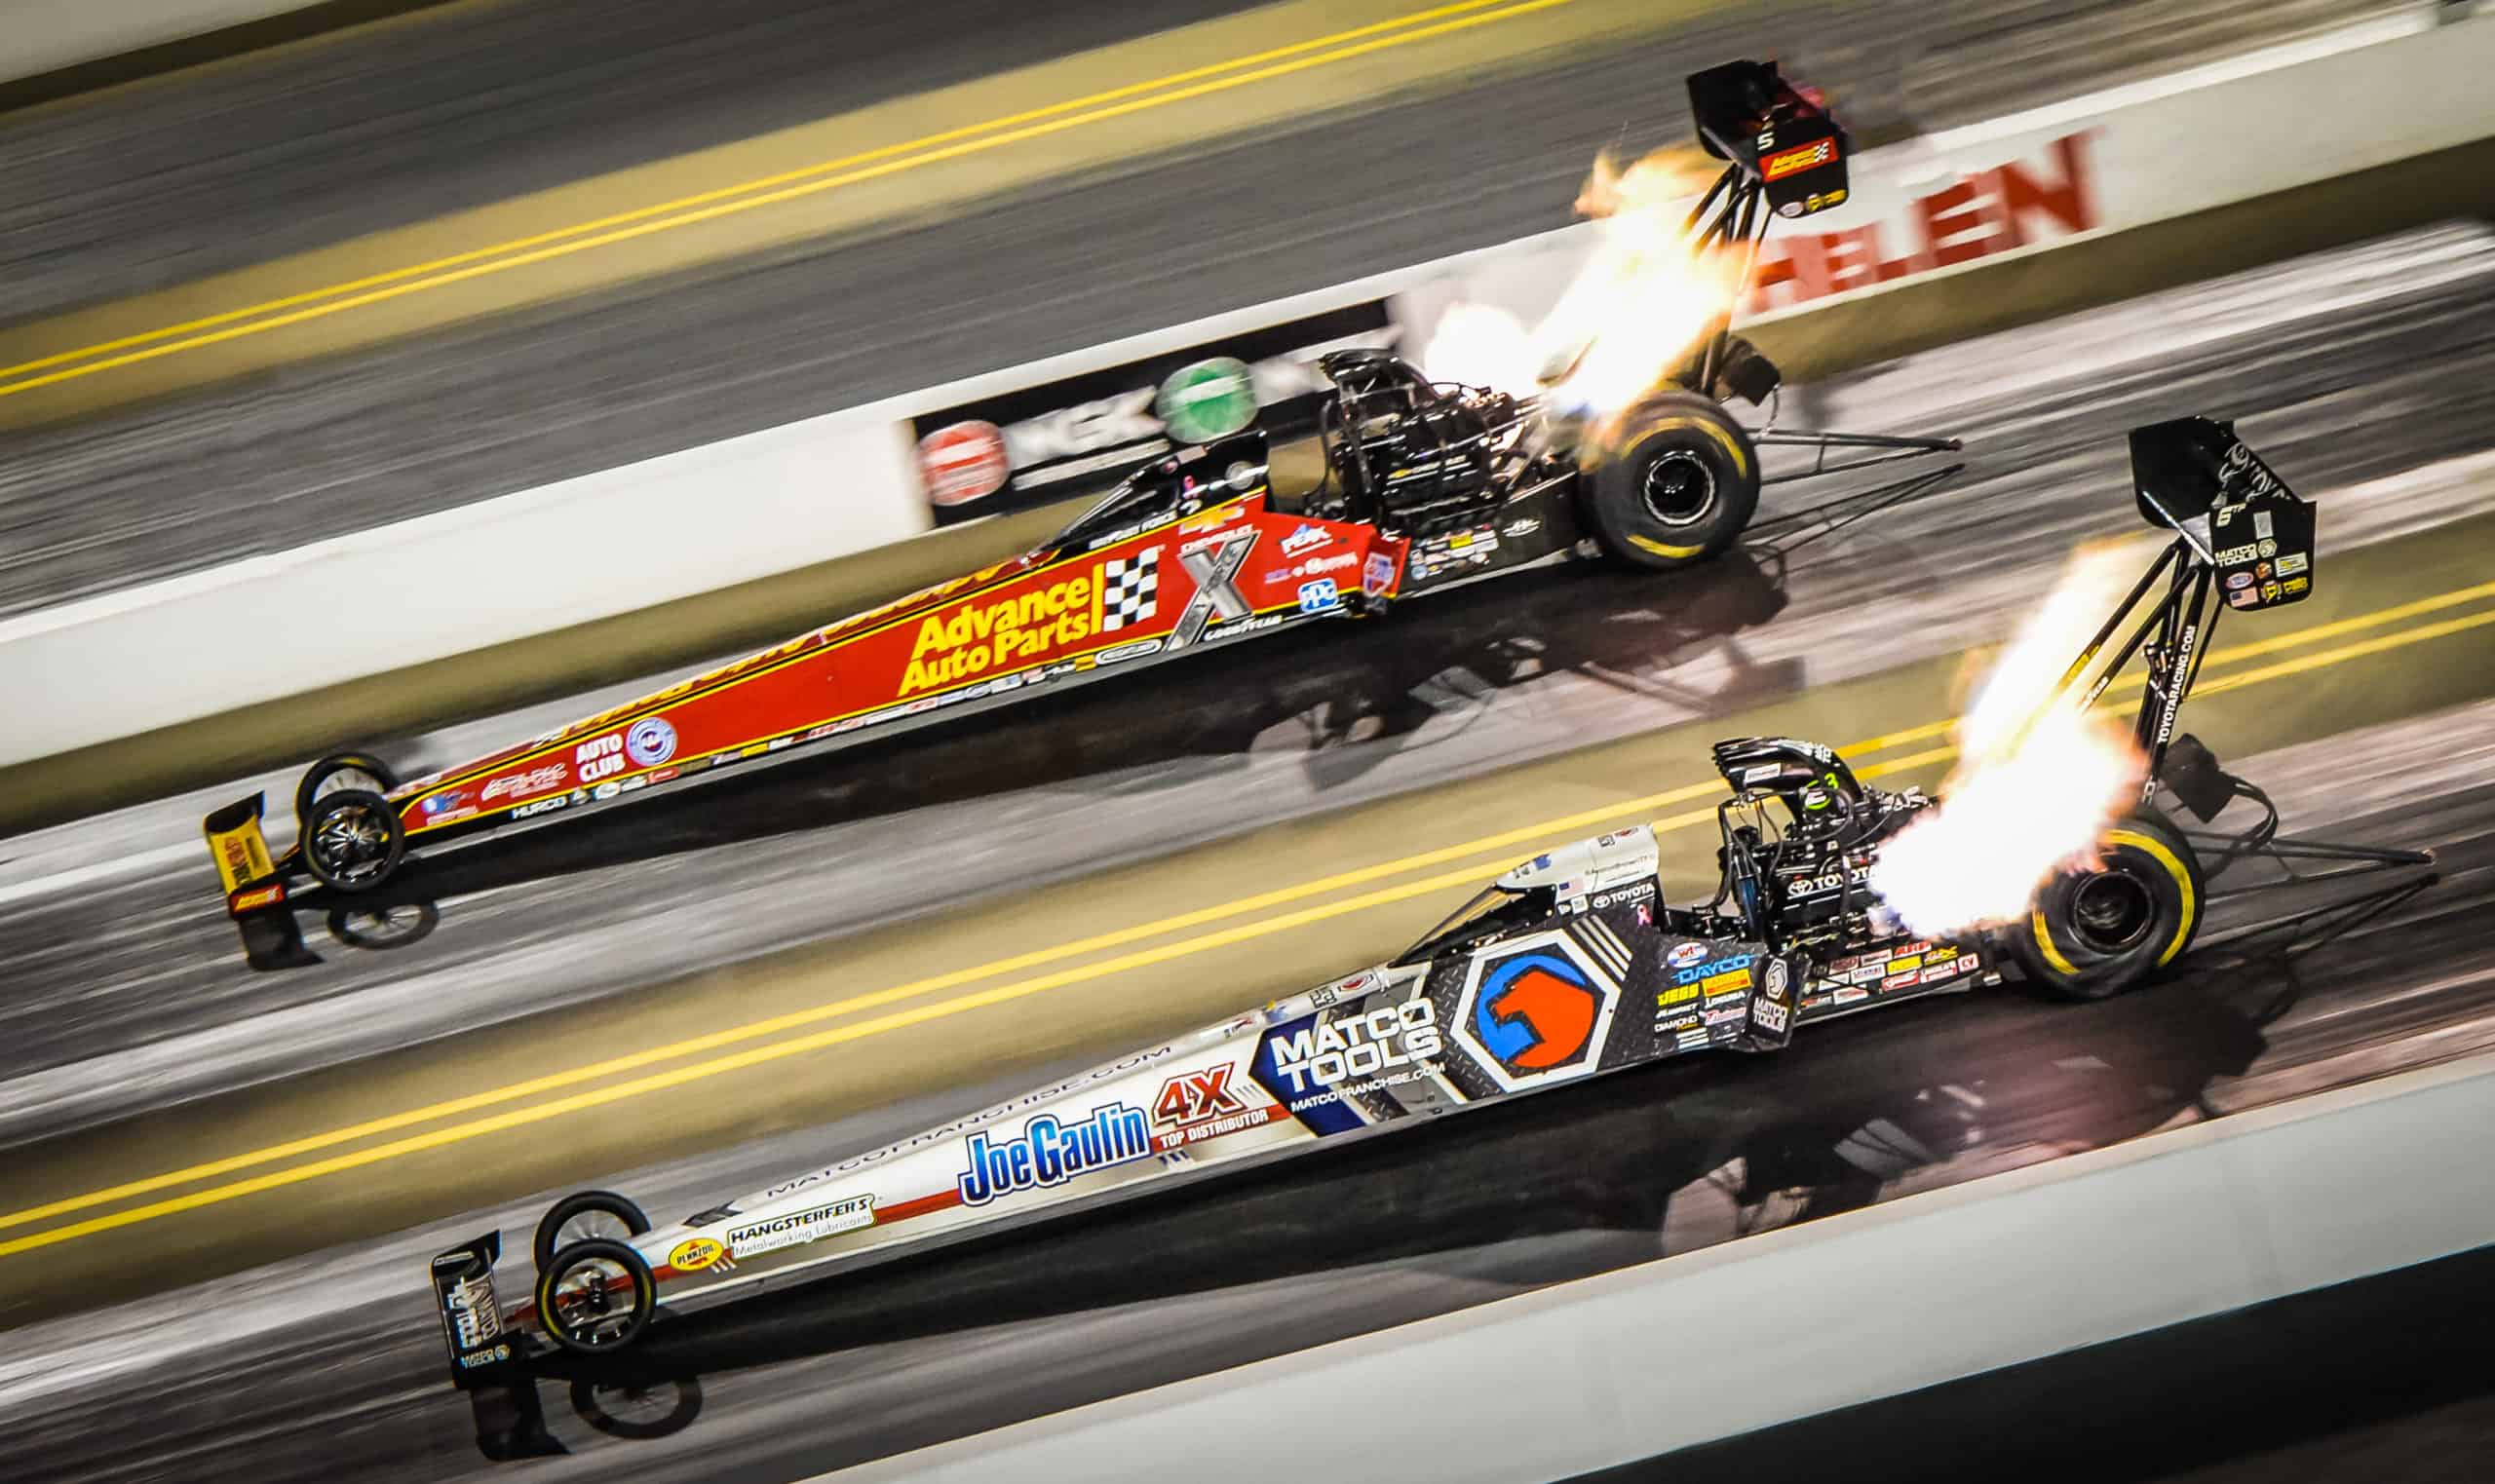 Dragsters race side-by-side at zMAX Dragway in Concord, North Carolina